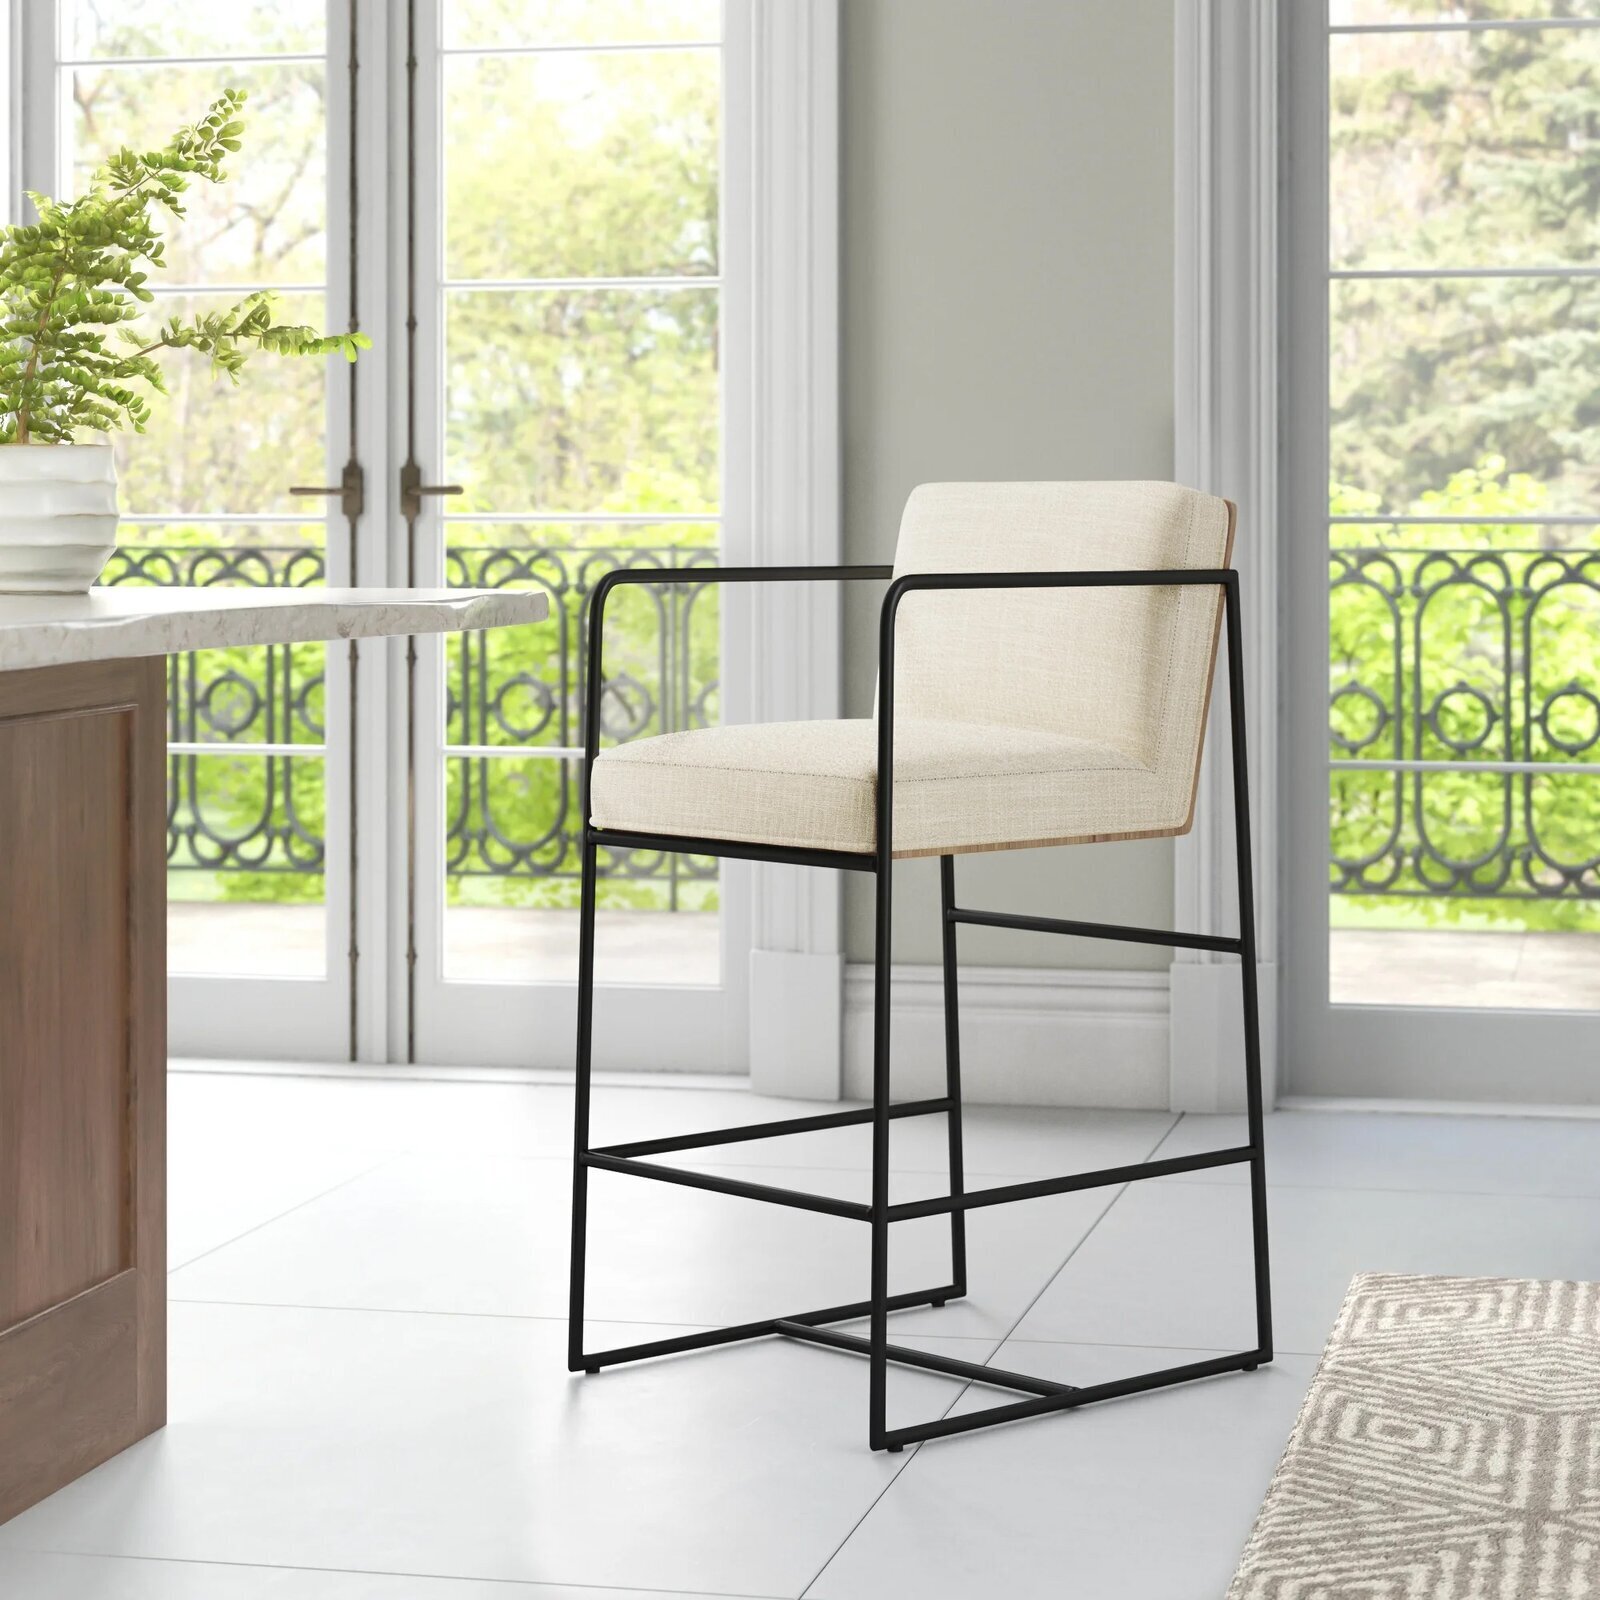 Cream bar chair with metal armrests 